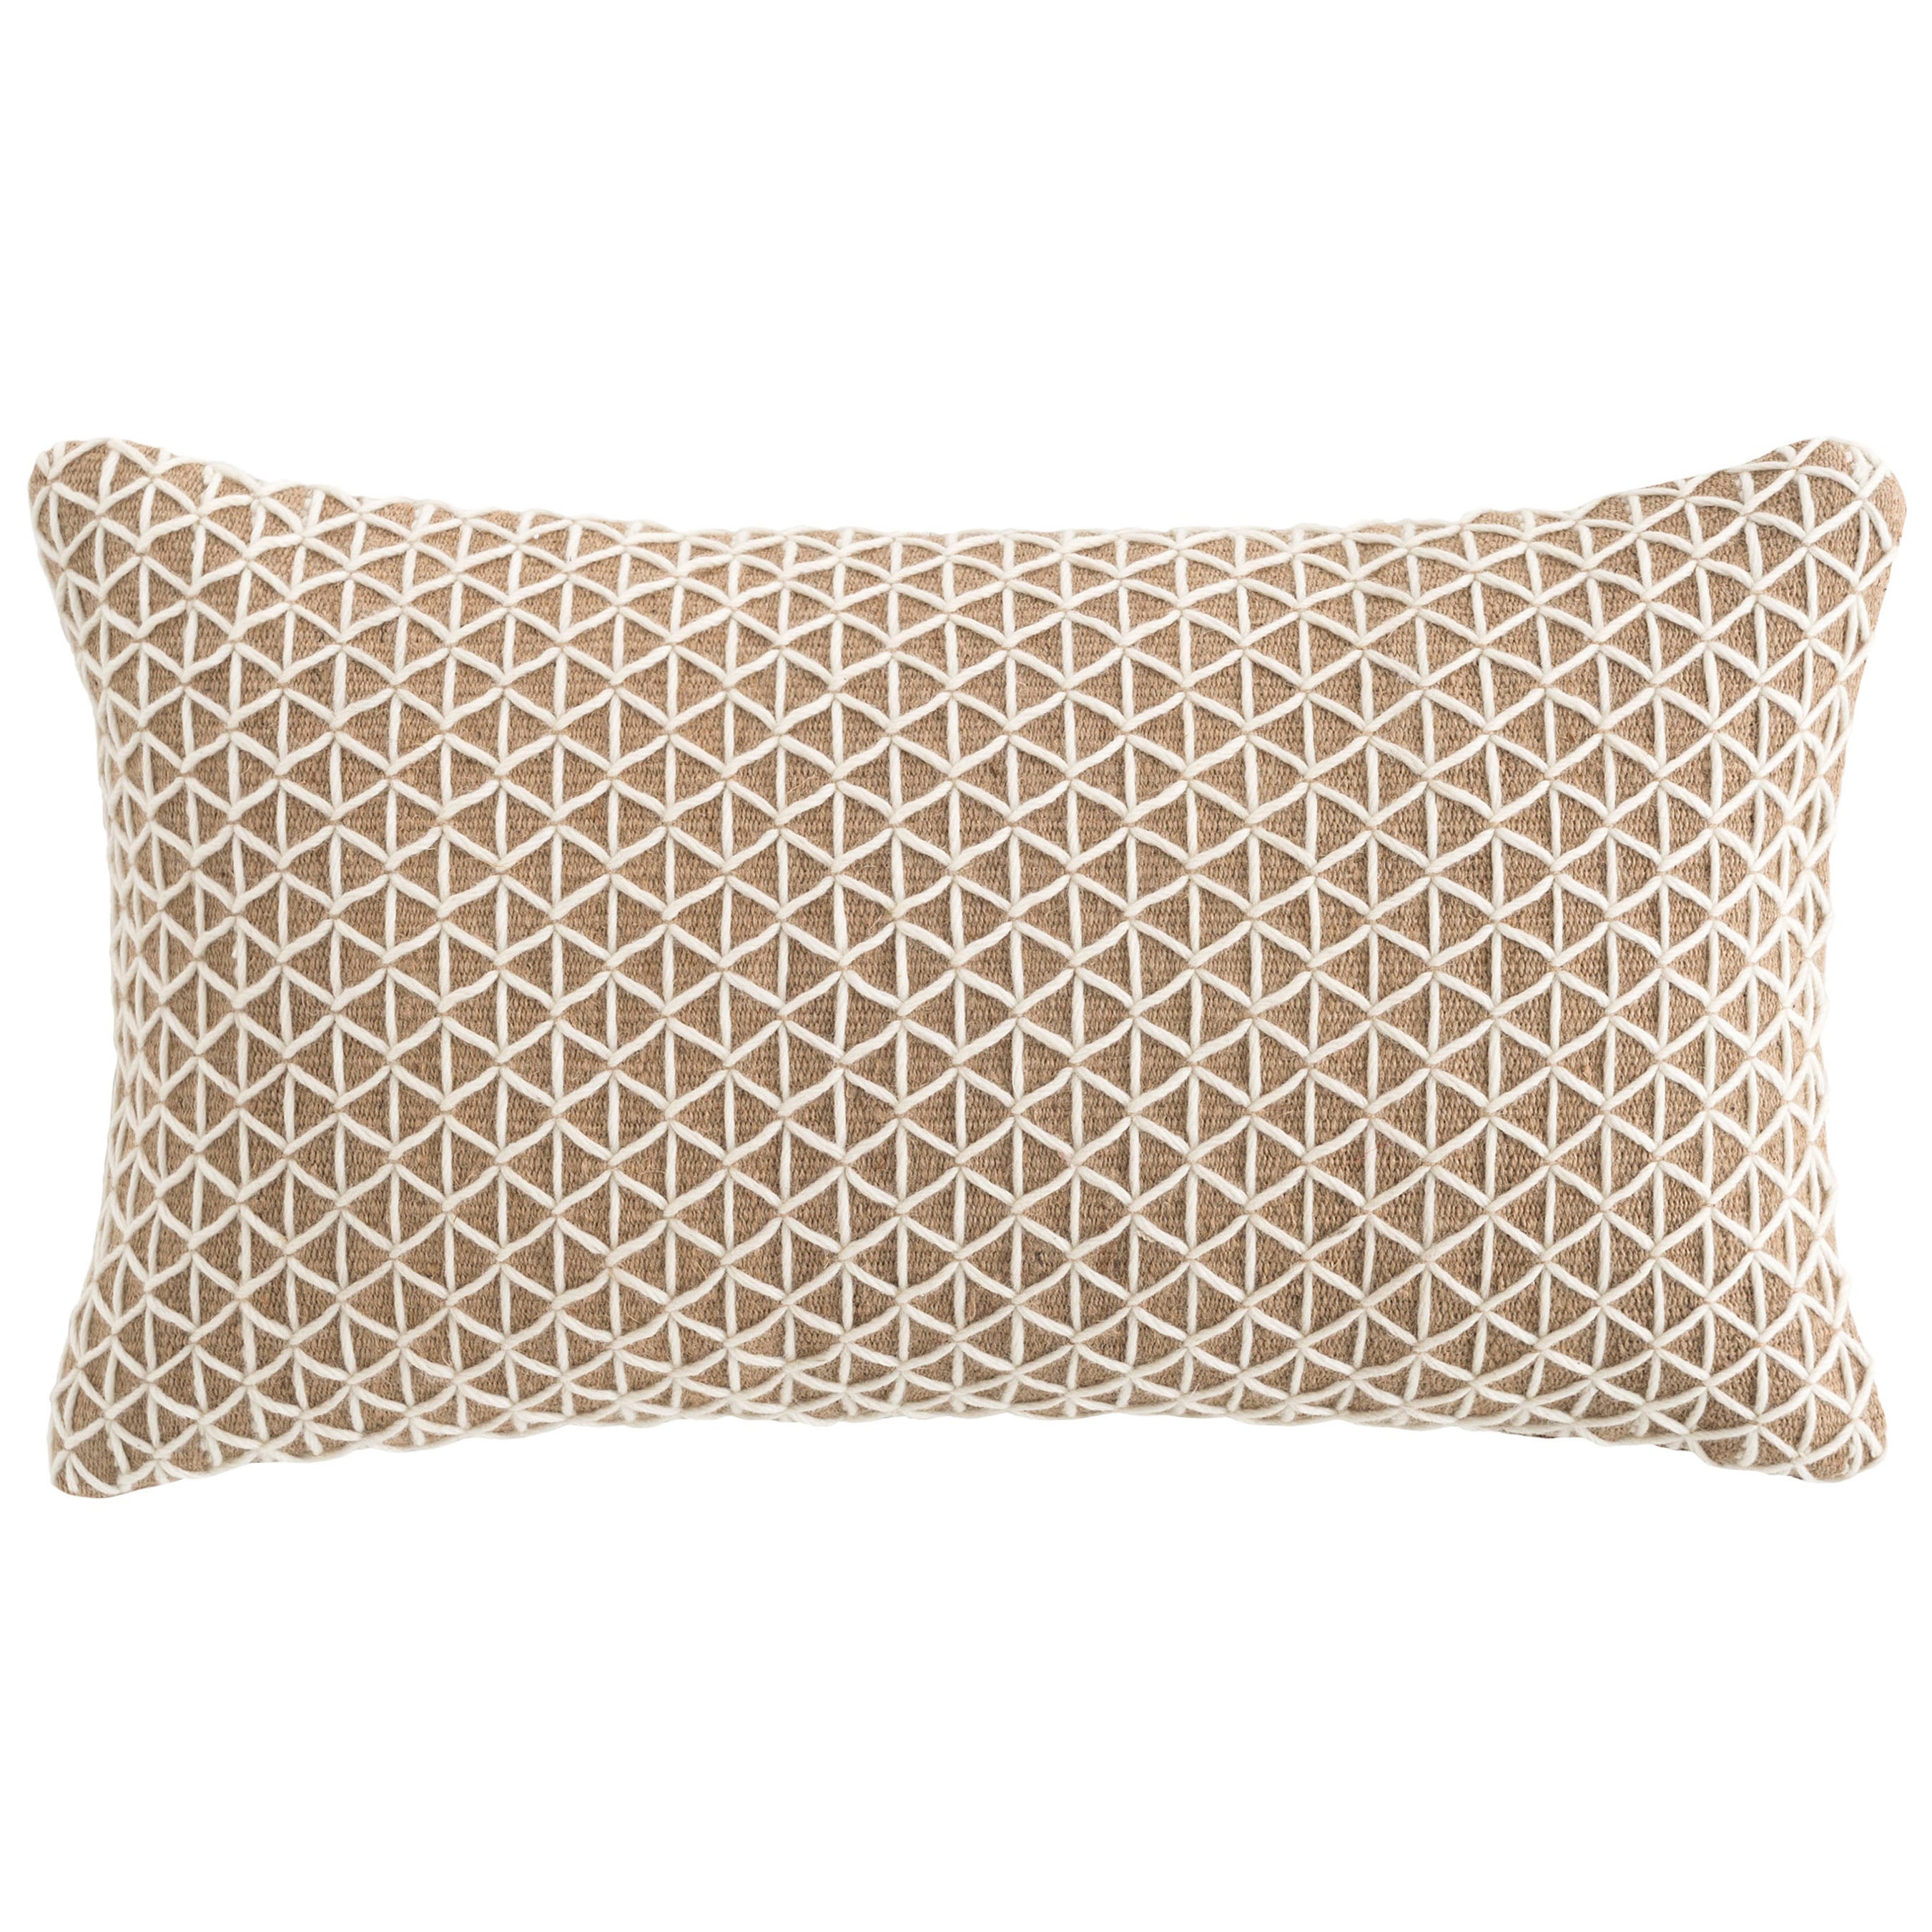 GAN Spaces Raw Large Pillow in White by Borja García For Sale